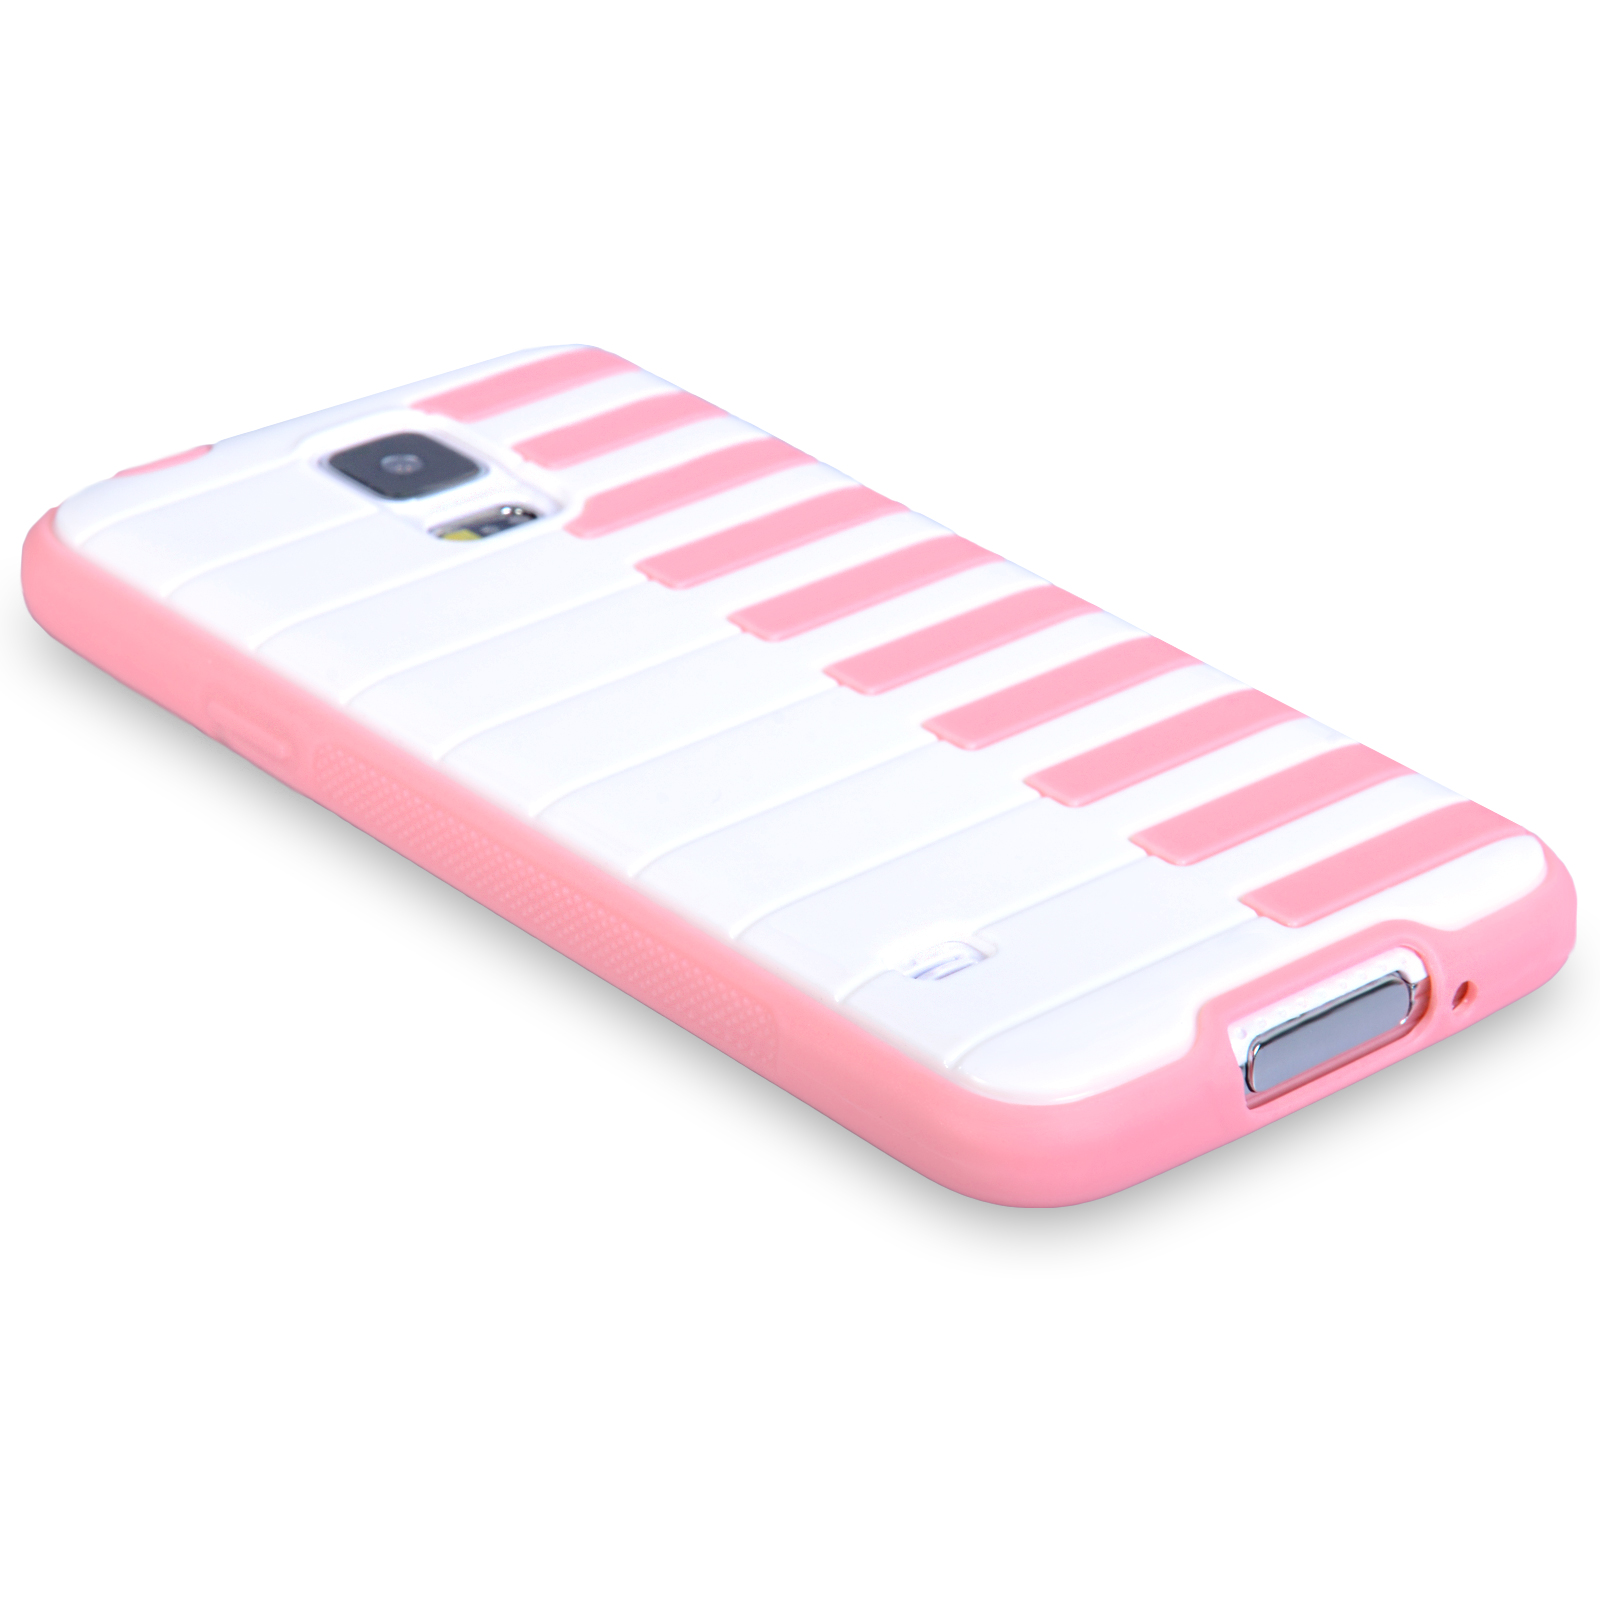 YouSave Accessories Samsung Galaxy S5 Piano Gel Case  - Pink